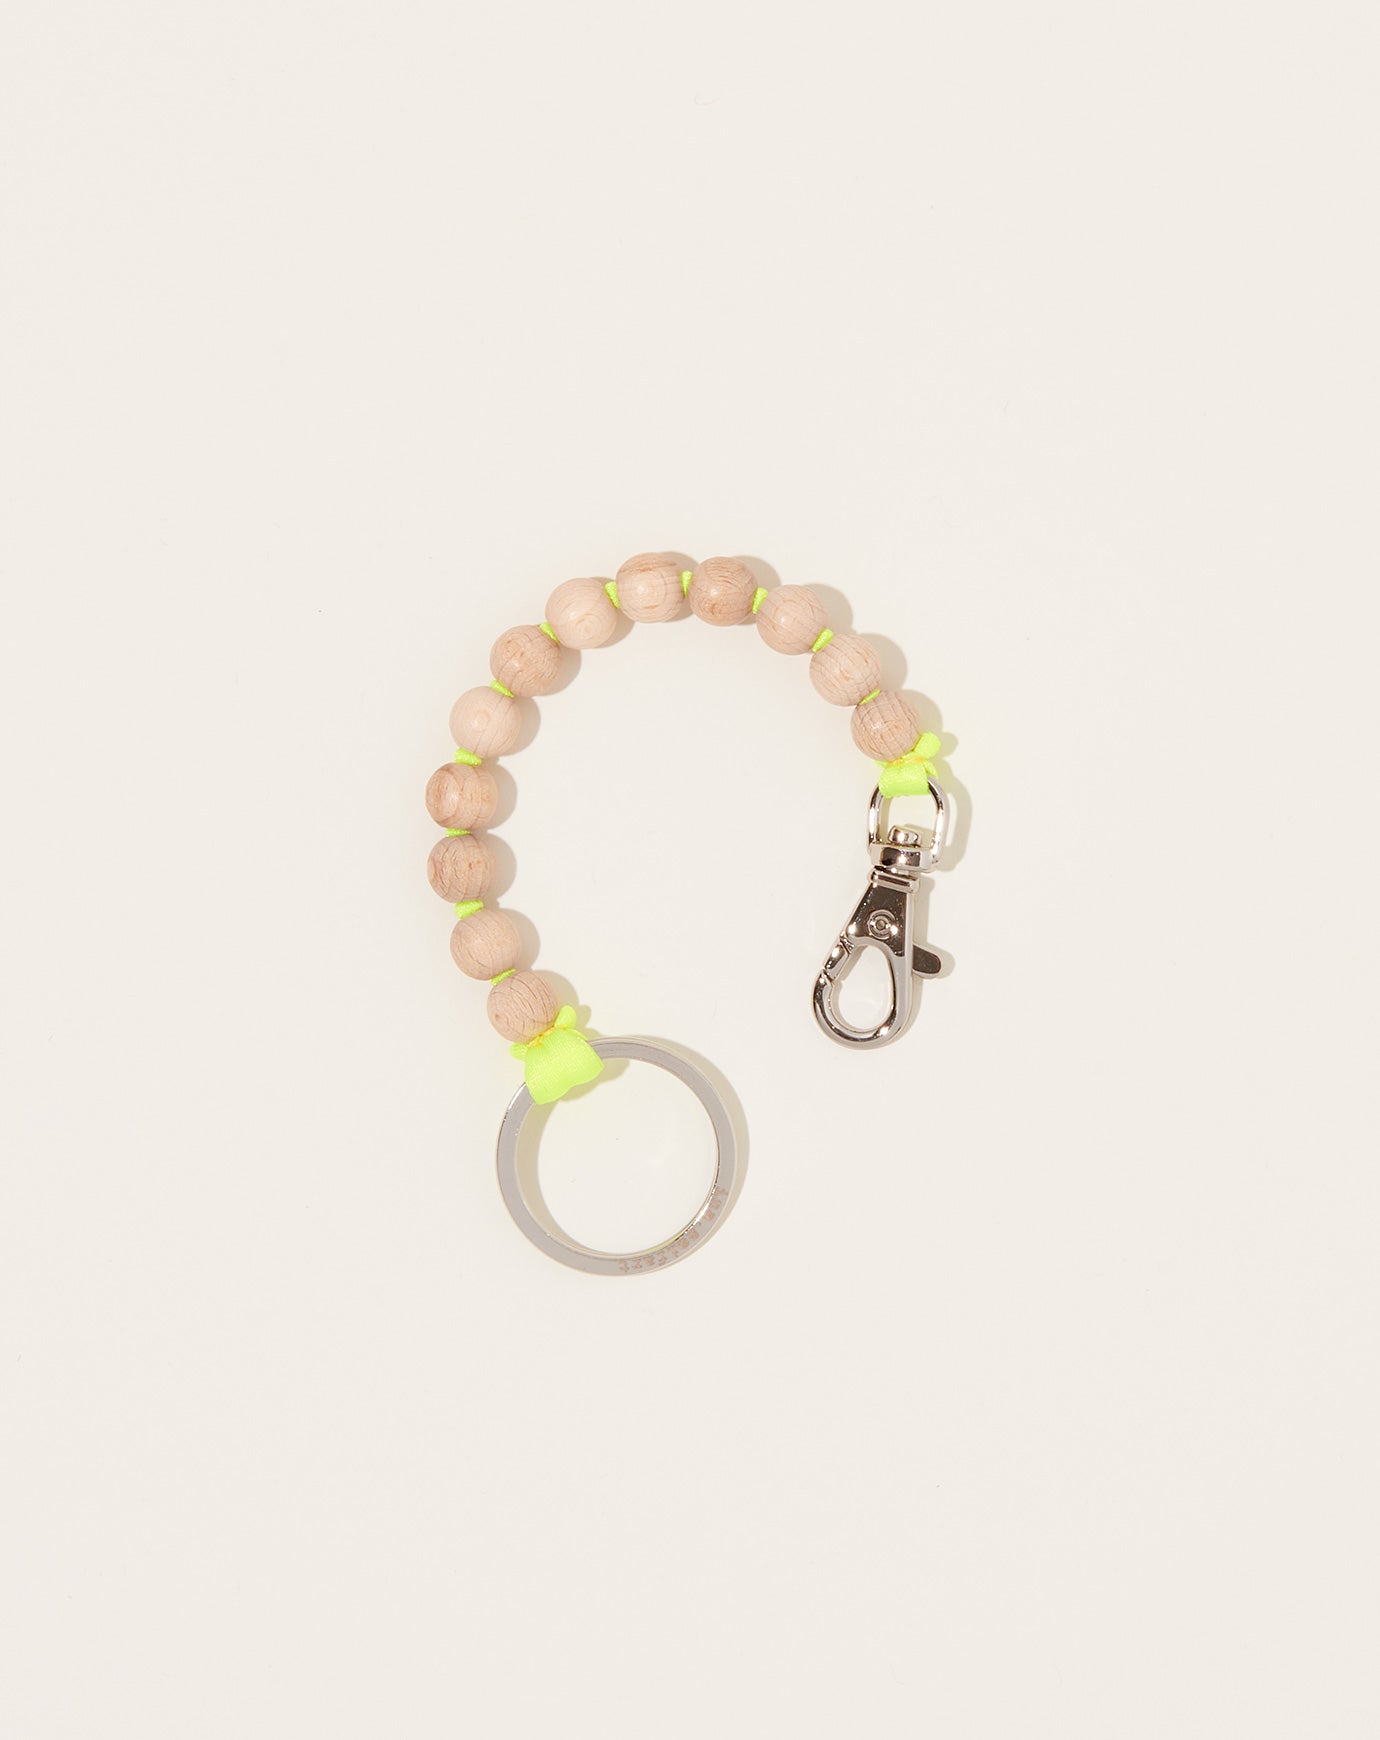 Ina Seifart Perlen Short Keyholder in Natural on Neon Yellow